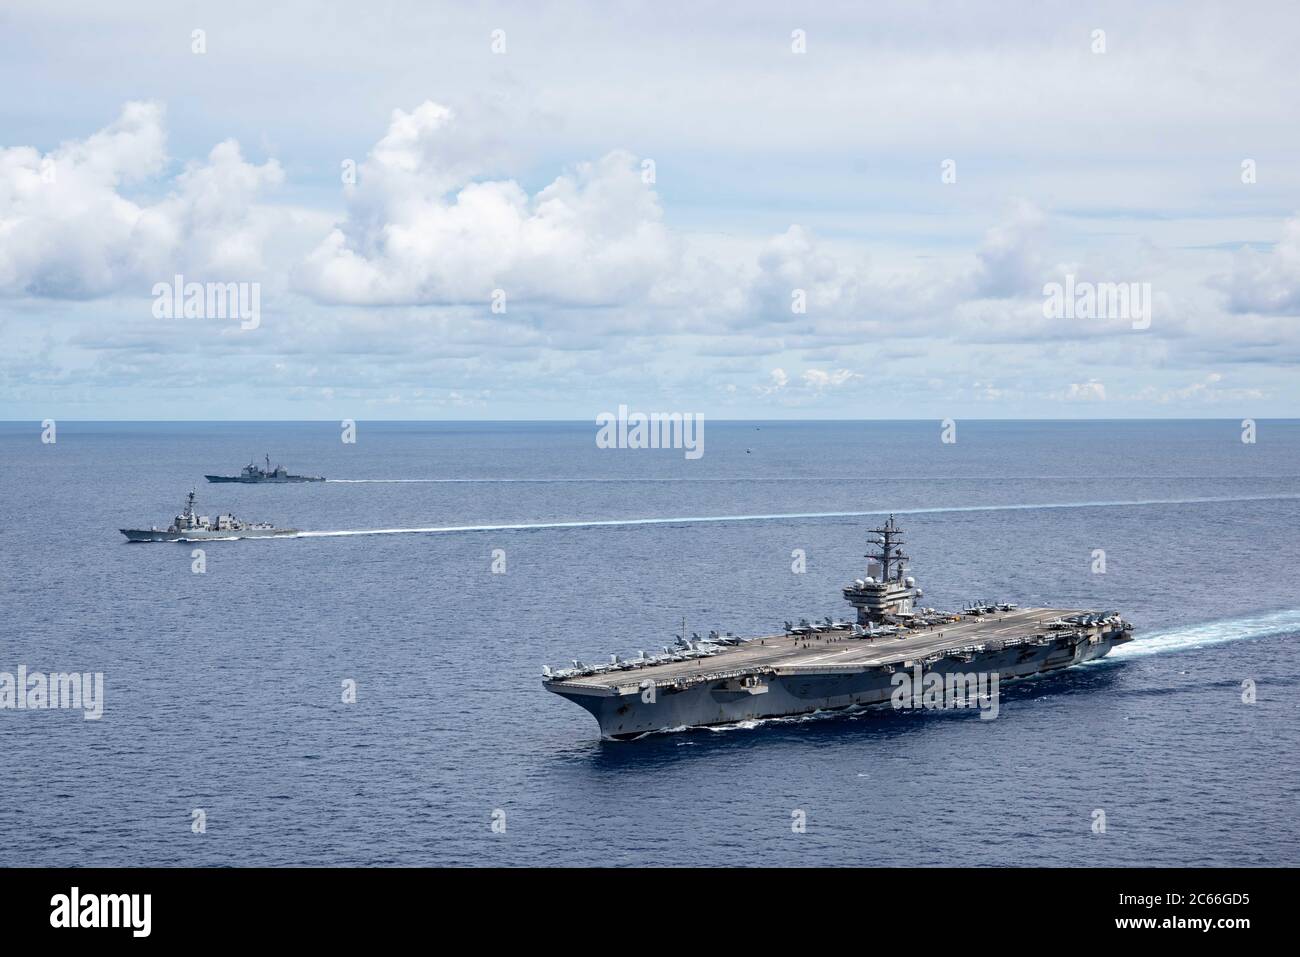 The U.S. Navy Nimitz-class aircraft carrier USS Ronald Reagan sails alongside the Arleigh Burke-class guided missile destroyer USS Mustin and the Ticonderoga-class guided missile cruiser USS Antietam during dual-carrier operations July 6, 2020 in the South China Sea. Stock Photo